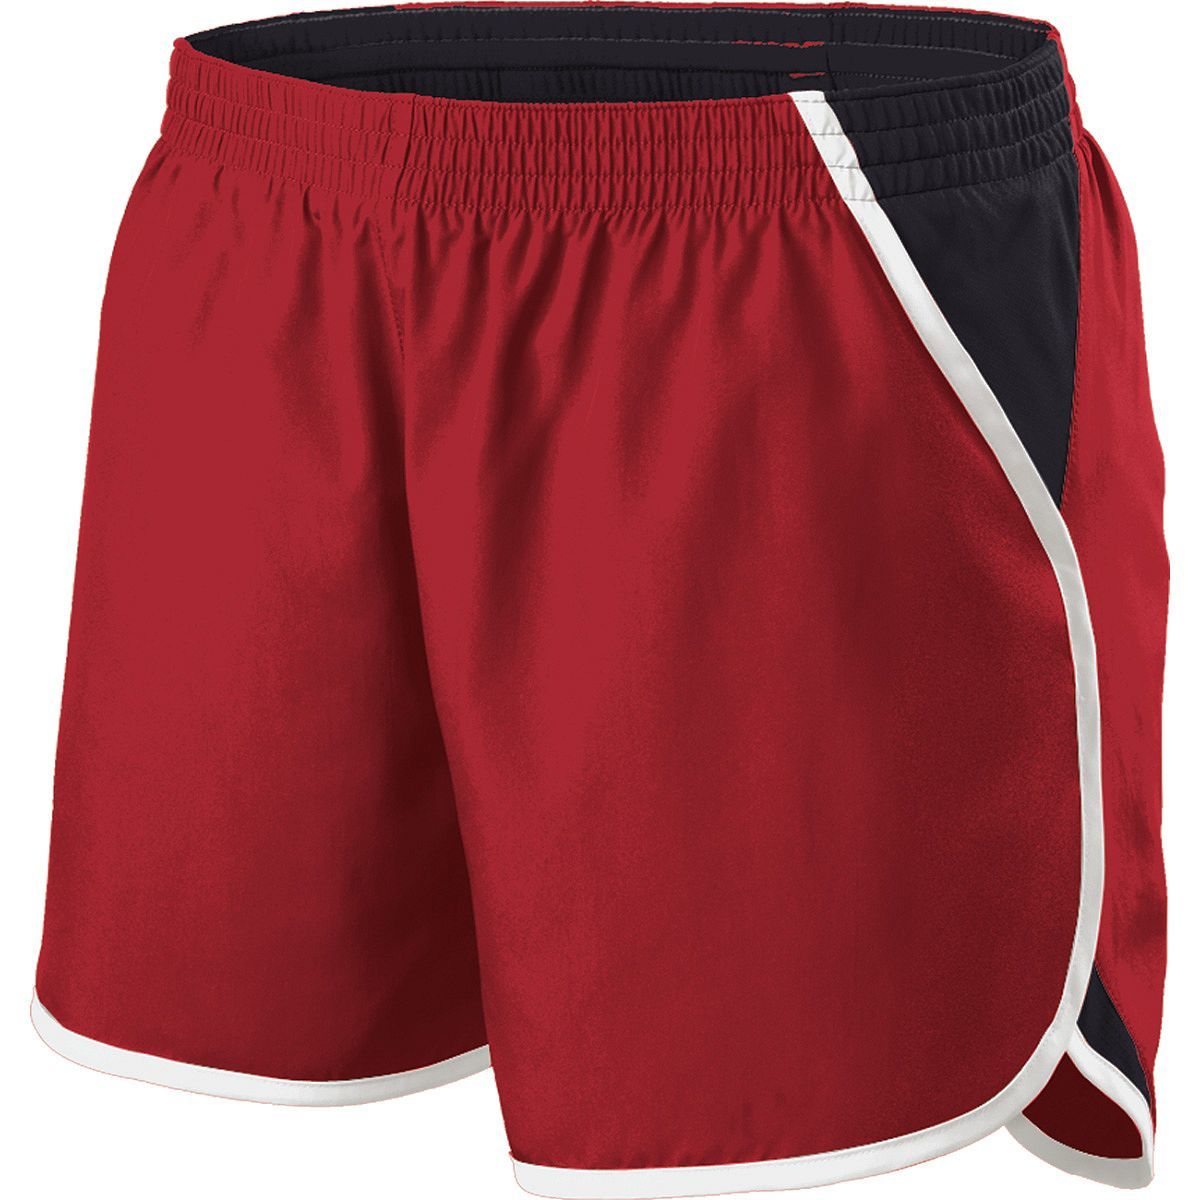 Holloway Girls Energize Shorts in Scarlet/Black/White  -Part of the Girls, Holloway, Girls-Shorts product lines at KanaleyCreations.com